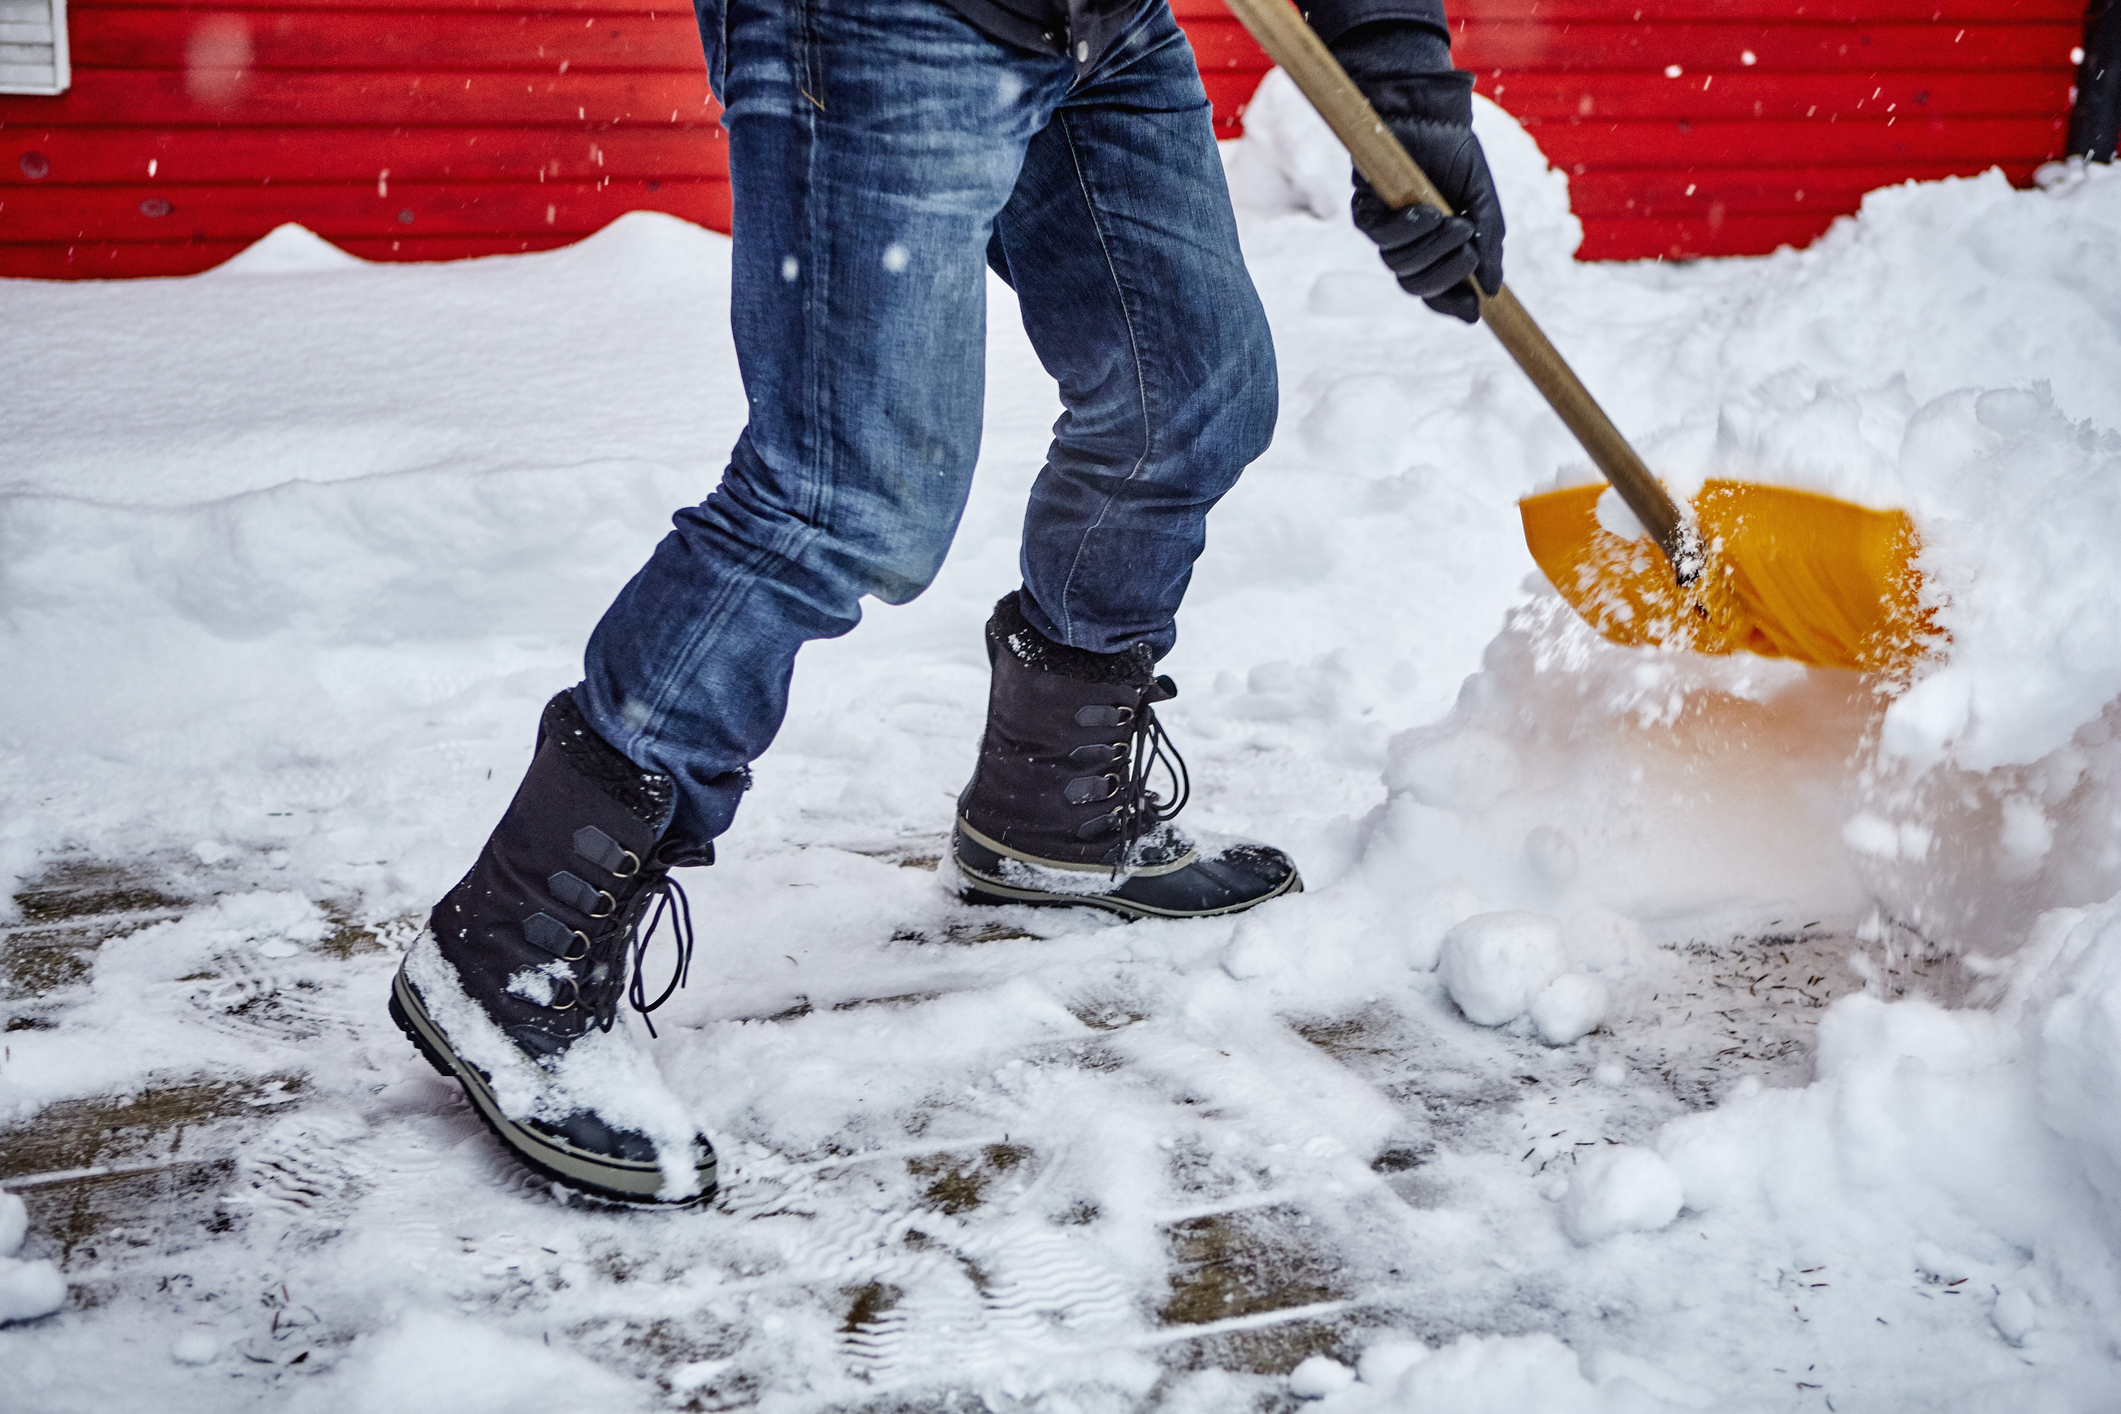 Don’t let wintry weather bring you down: avoiding winter’s risks for orthopedic injuries